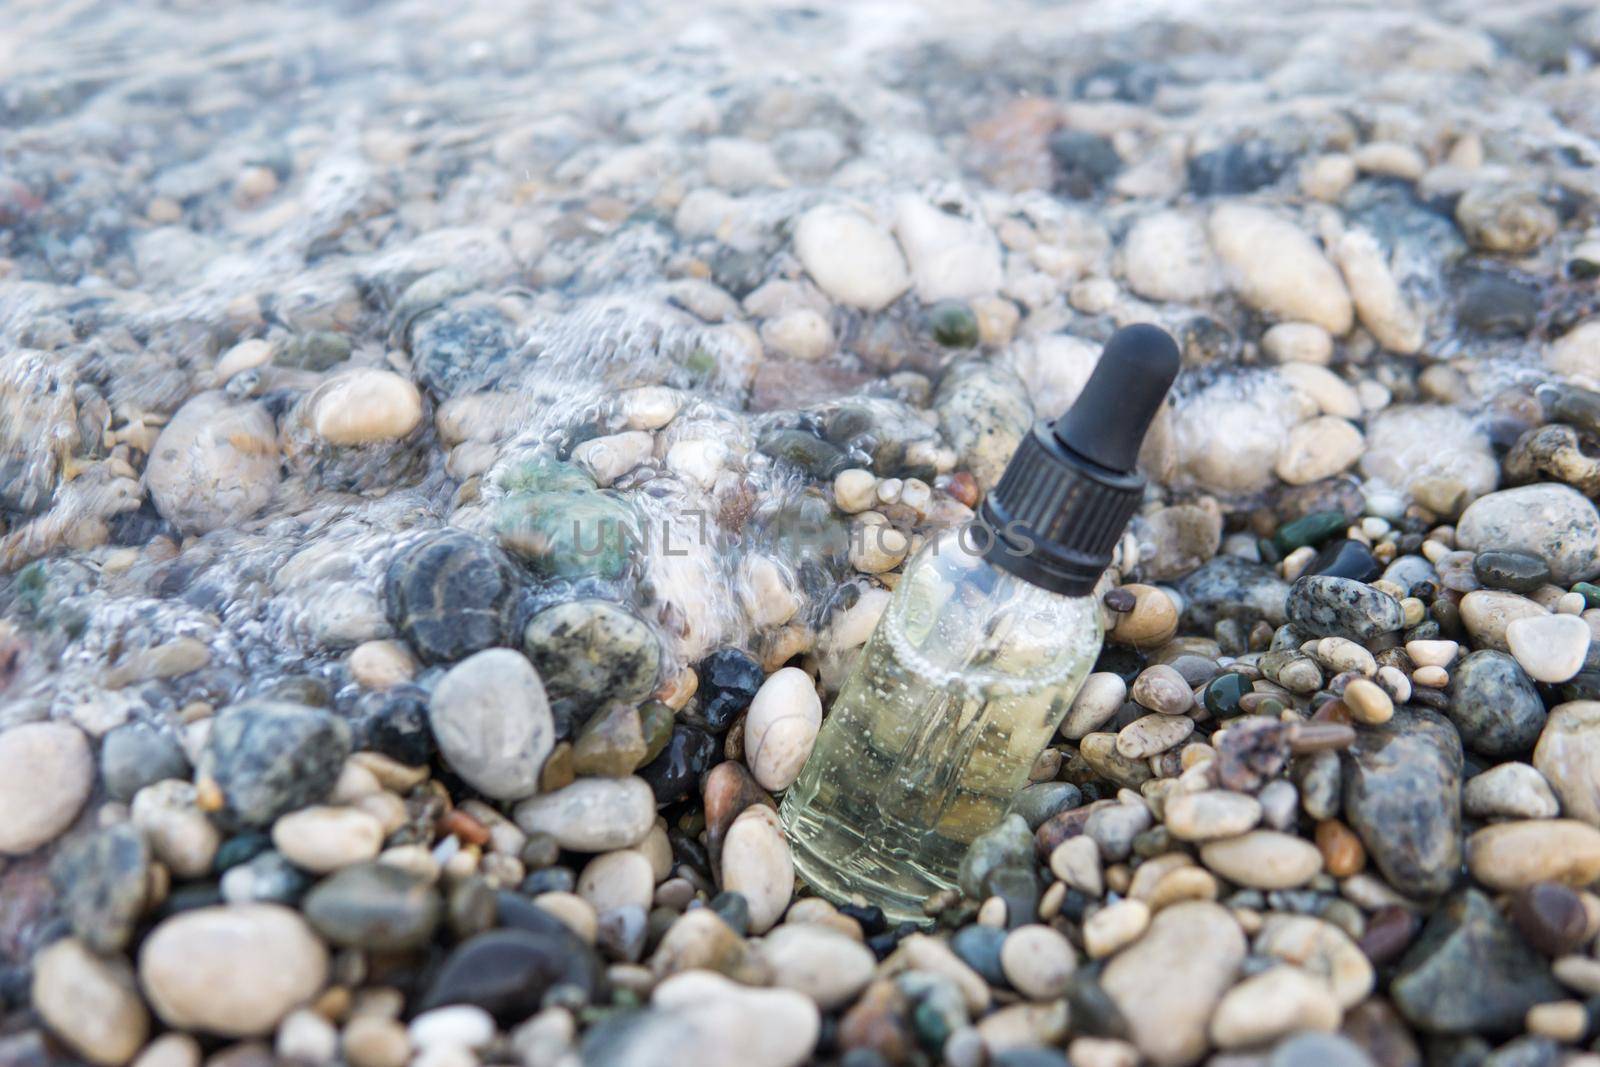 Cosmetic serum for the skin in a glass bottle. A bottle with an eyedropper on a pebble beach by the sea. Essences for skin care on the background of stones. The concept of natural cosmetics and SPA products.